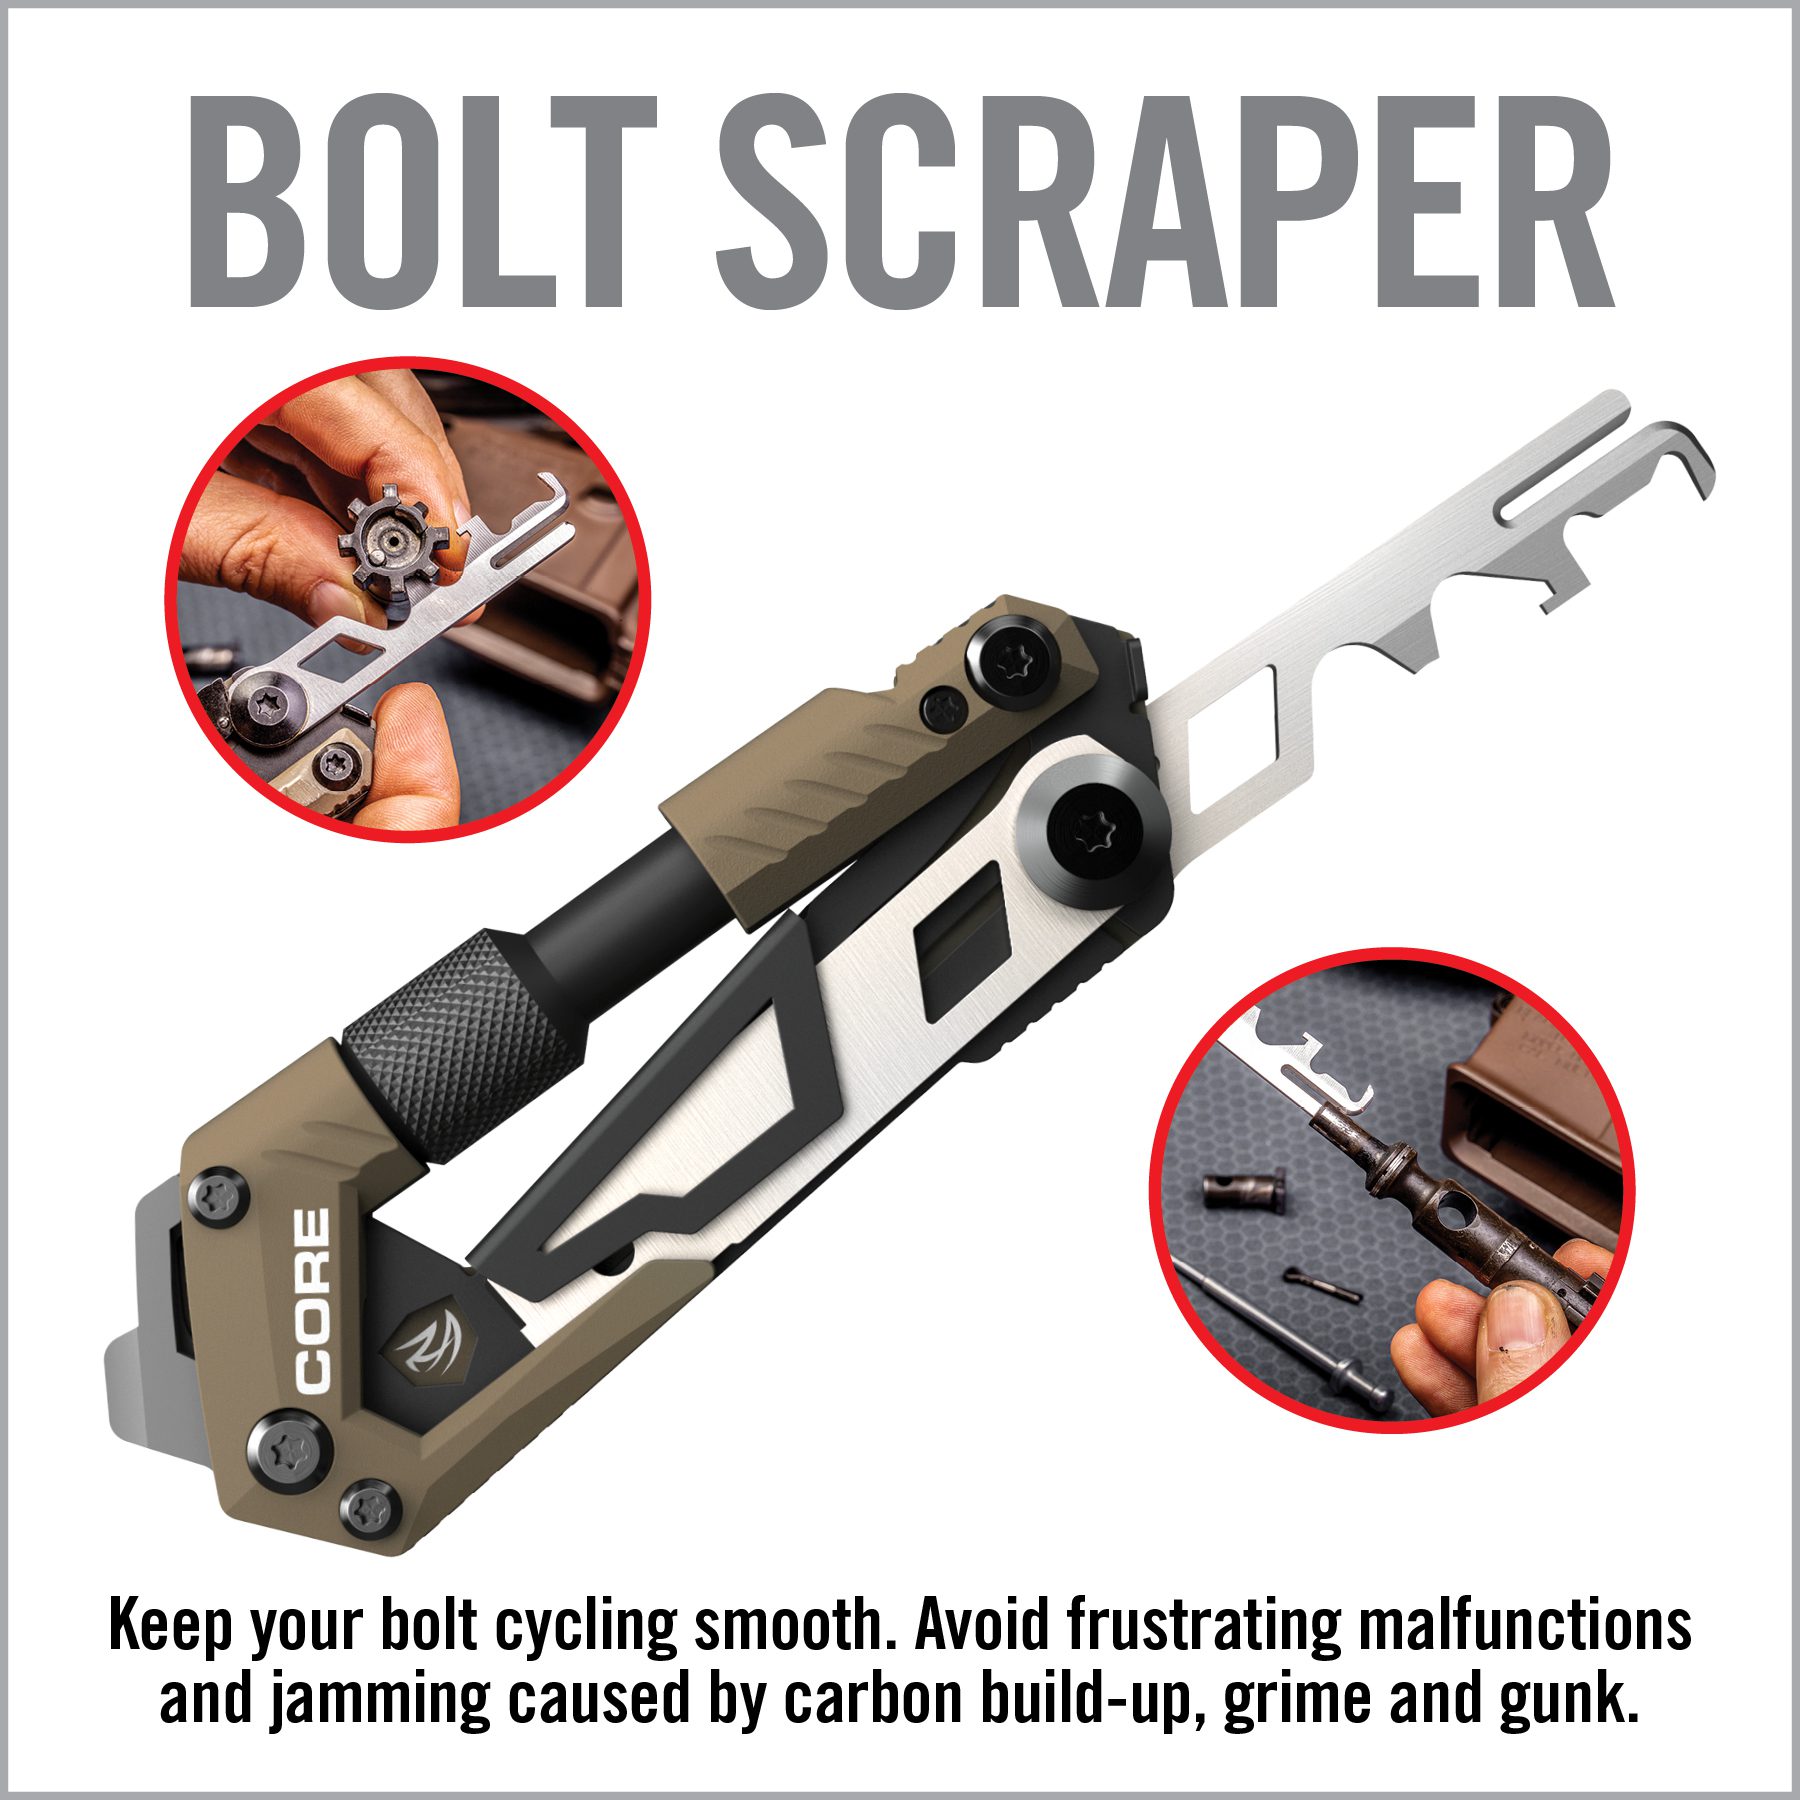 a poster with instructions on how to use a bolt scraper